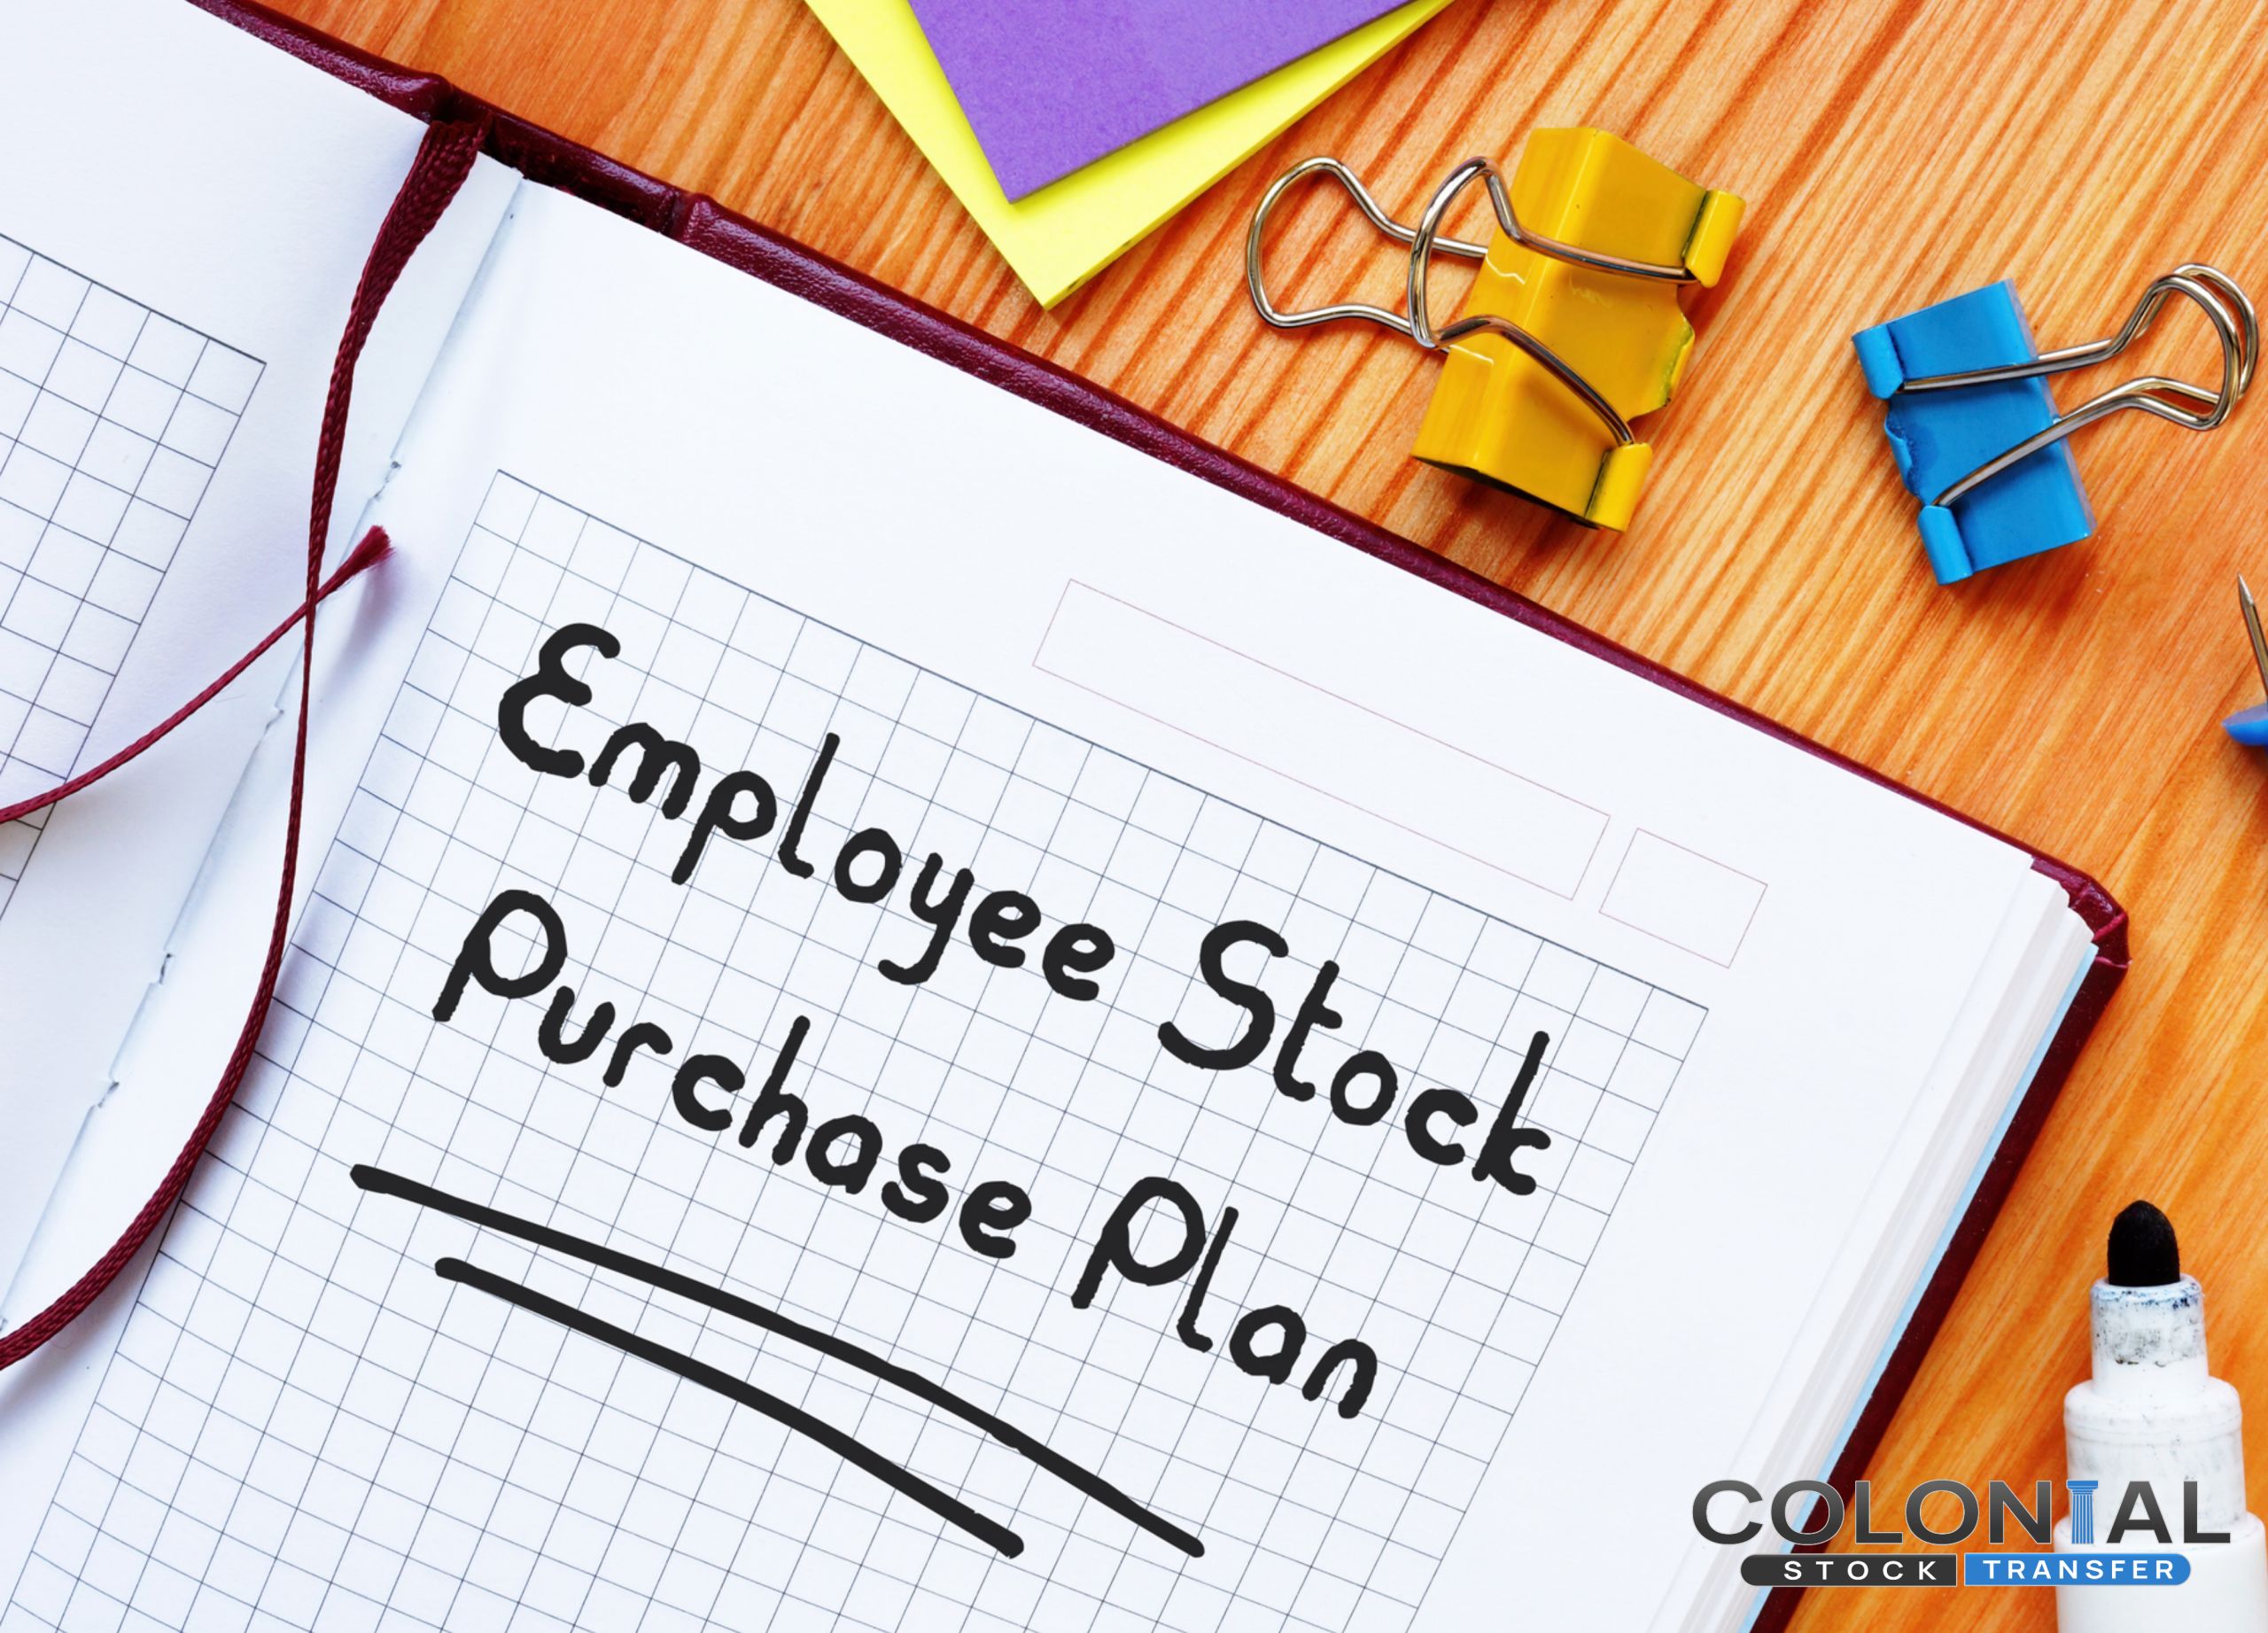 How an Employee Stock Purchase Plan Functions